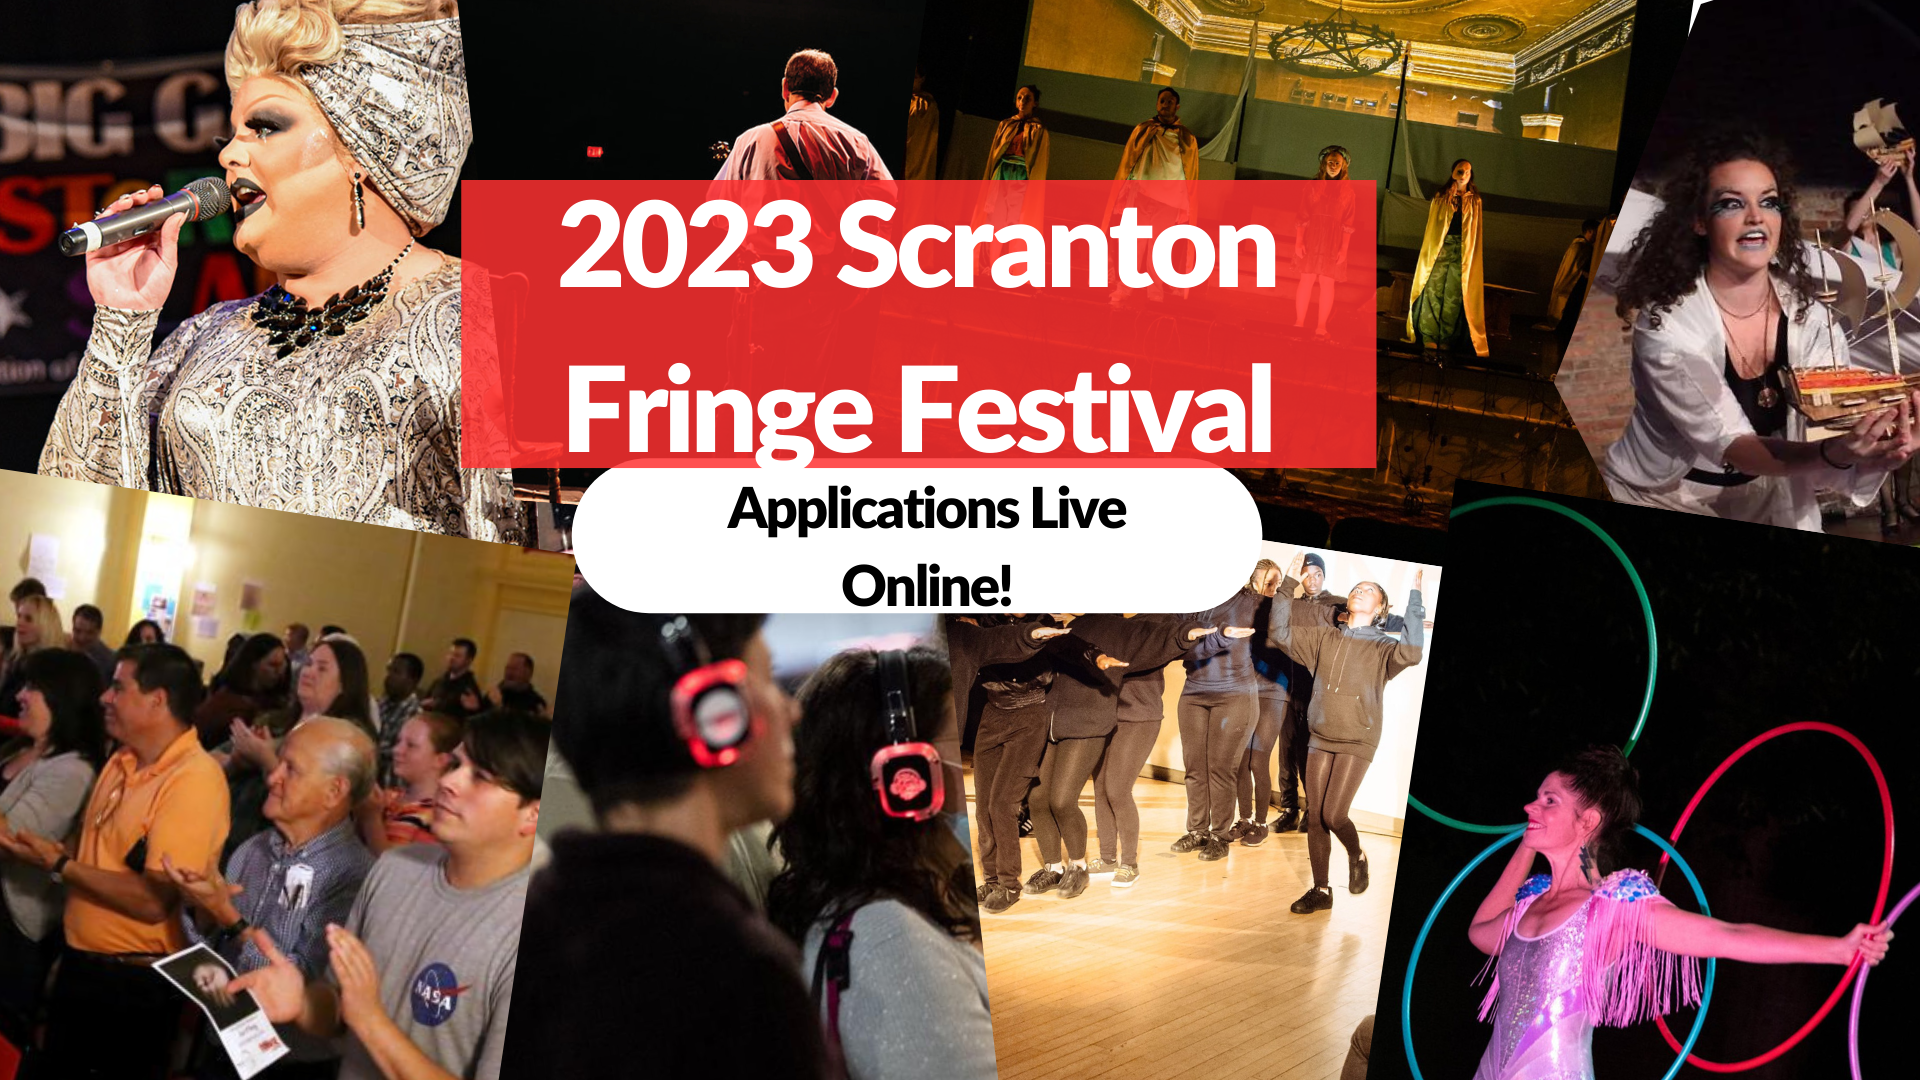 Graphic with multiple images of performers at previous Fringe Festivals. Text says "2023 Scranton Fringe Festival, applications live online'.